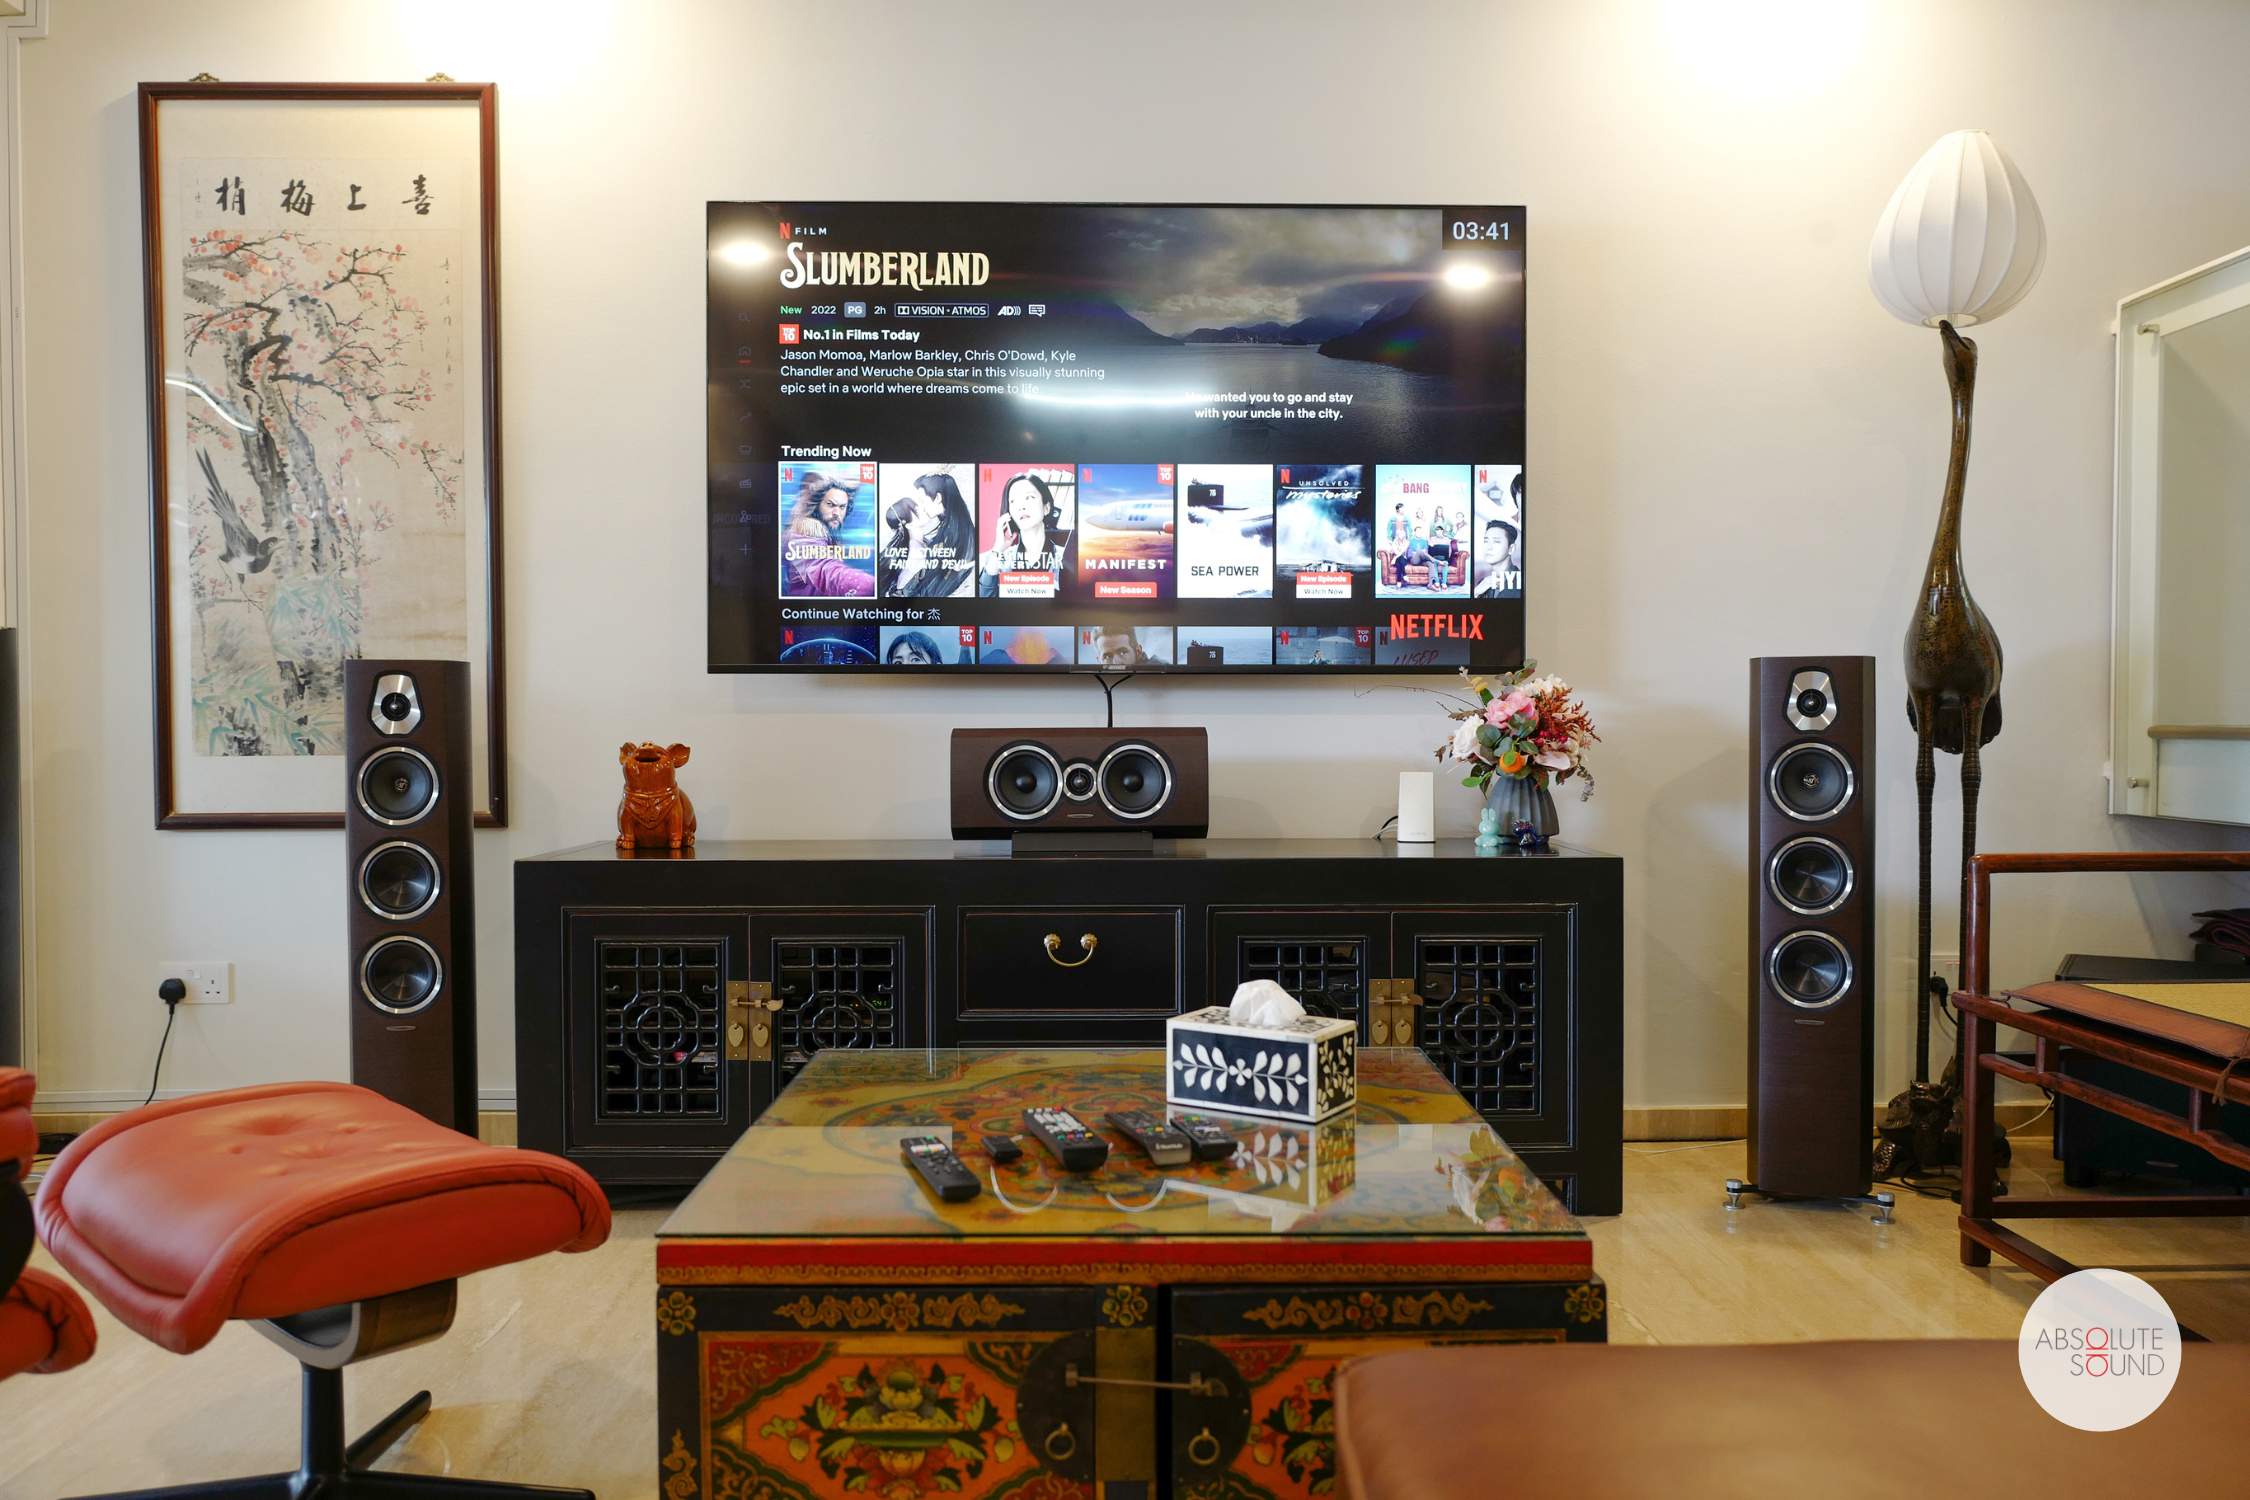 Front View Of Sonus Faber 5.1.2 Home Theater System